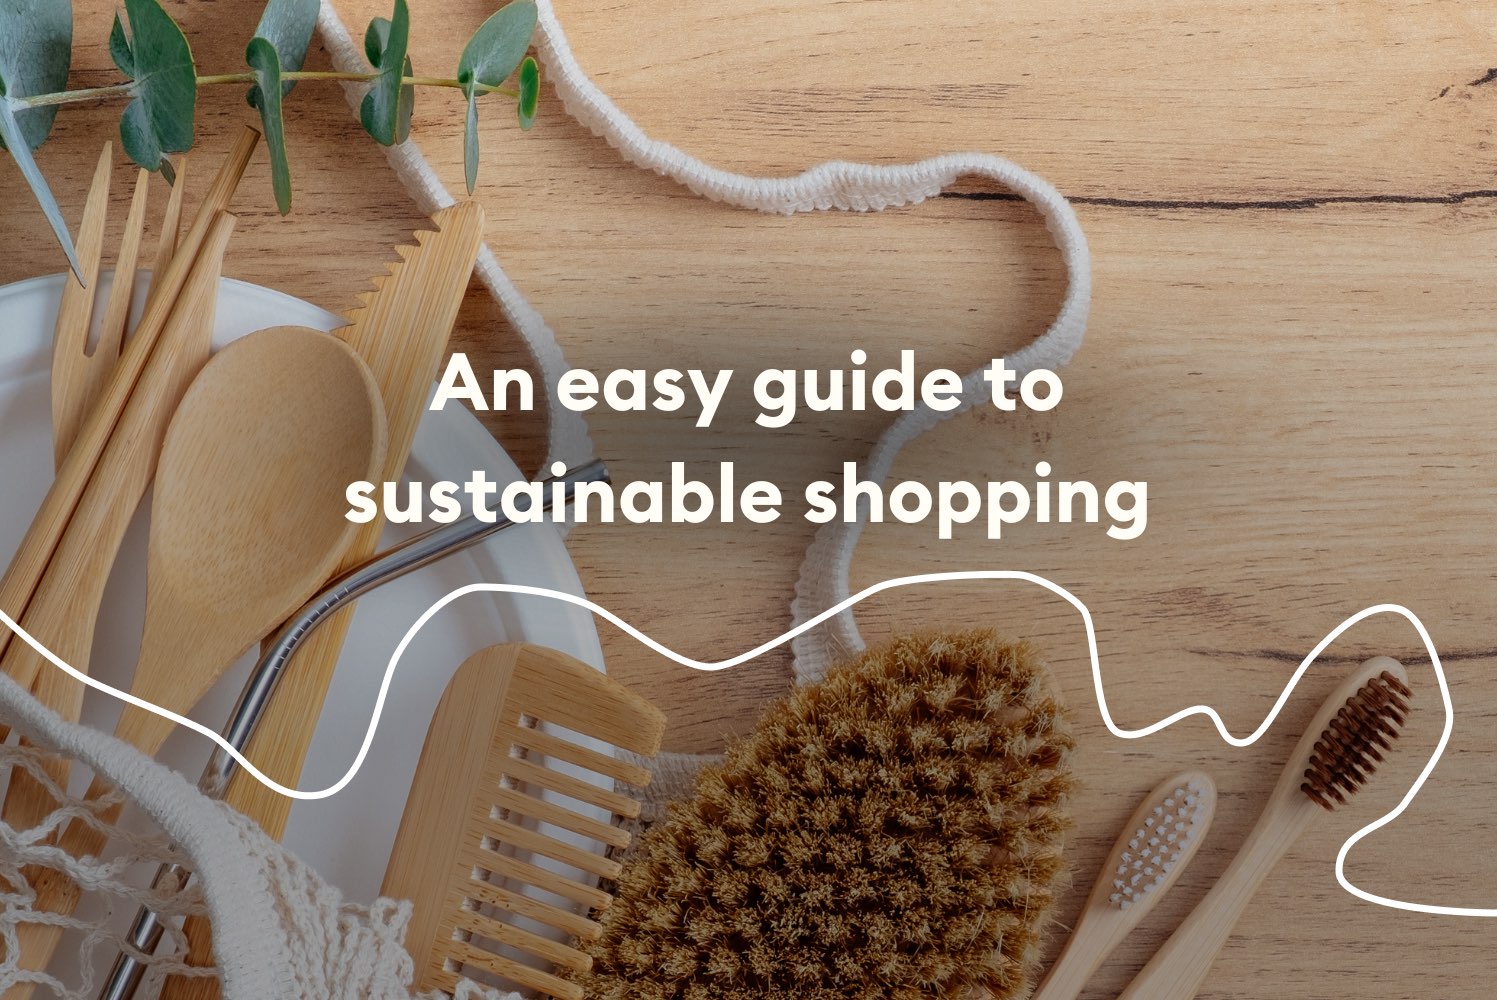 Sustainable shopping utensils laying on a wooden table